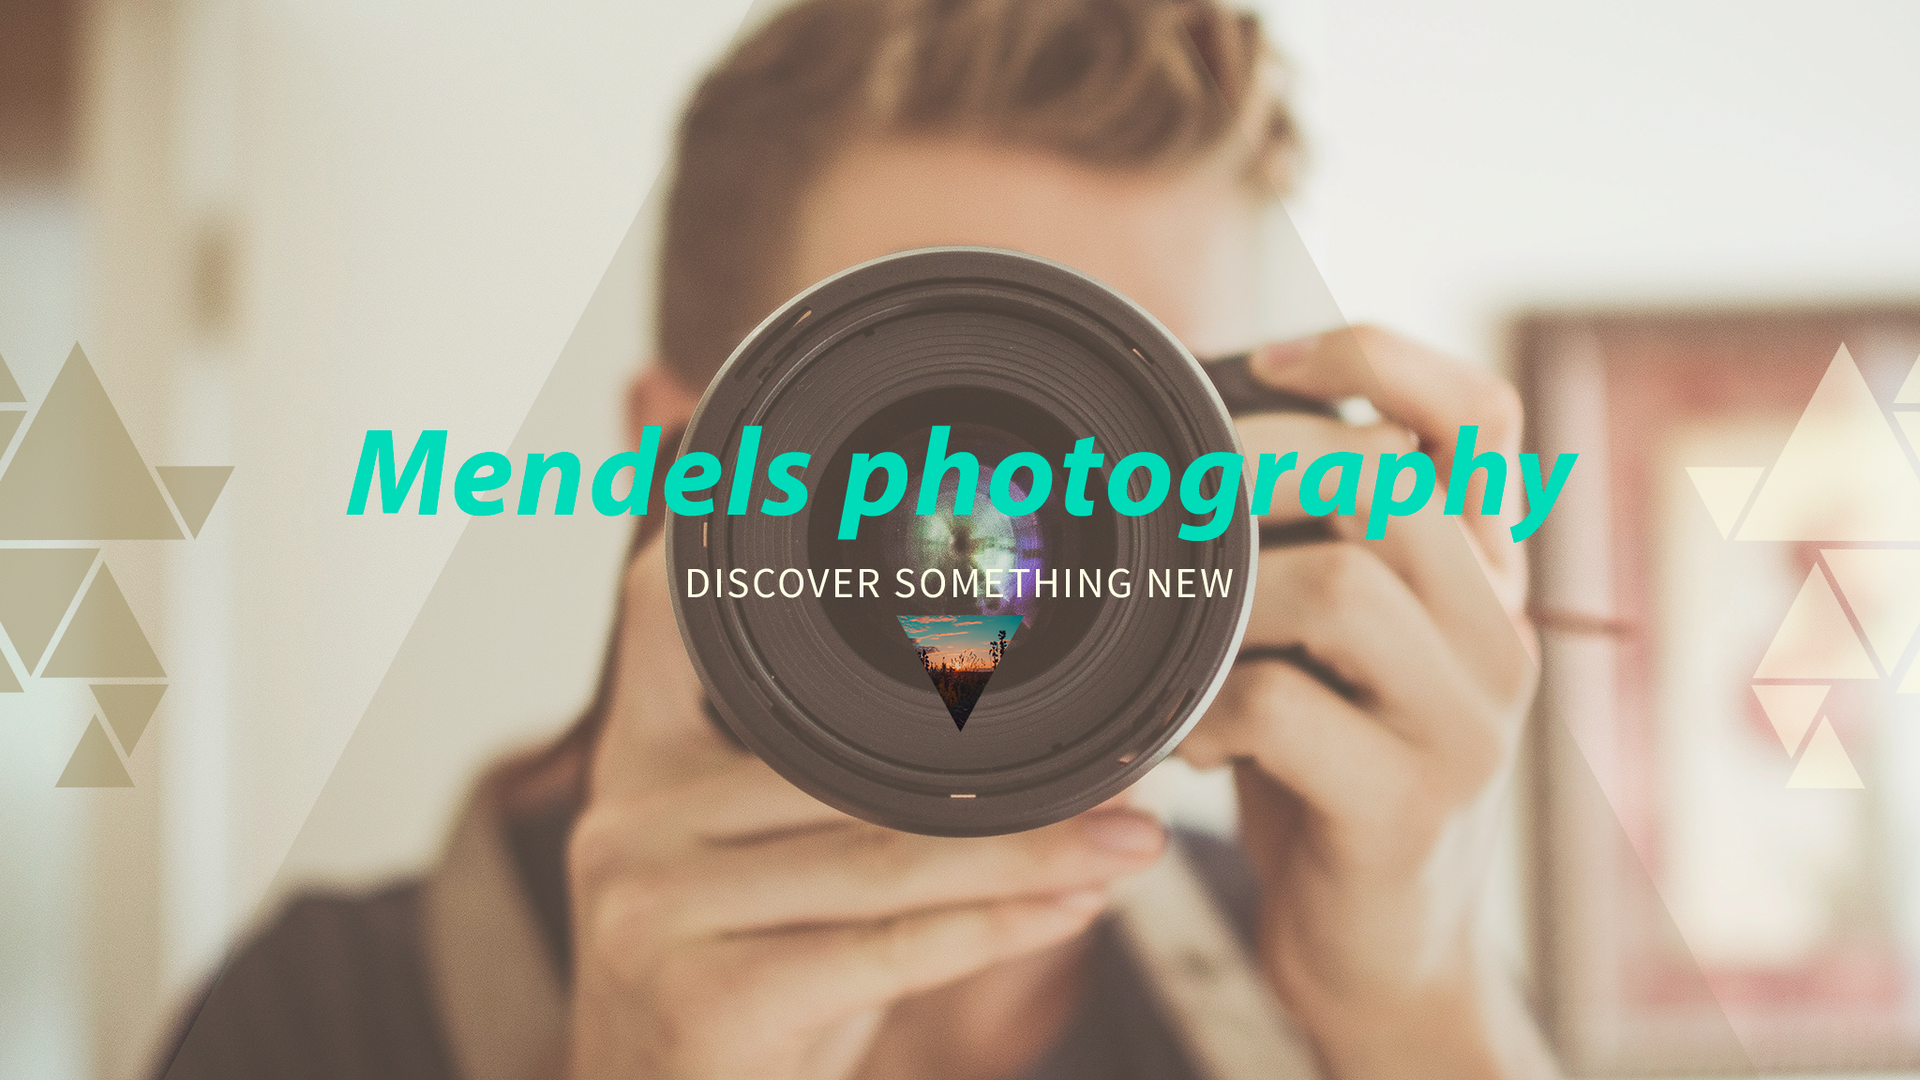 Mendels Photography's Gallery